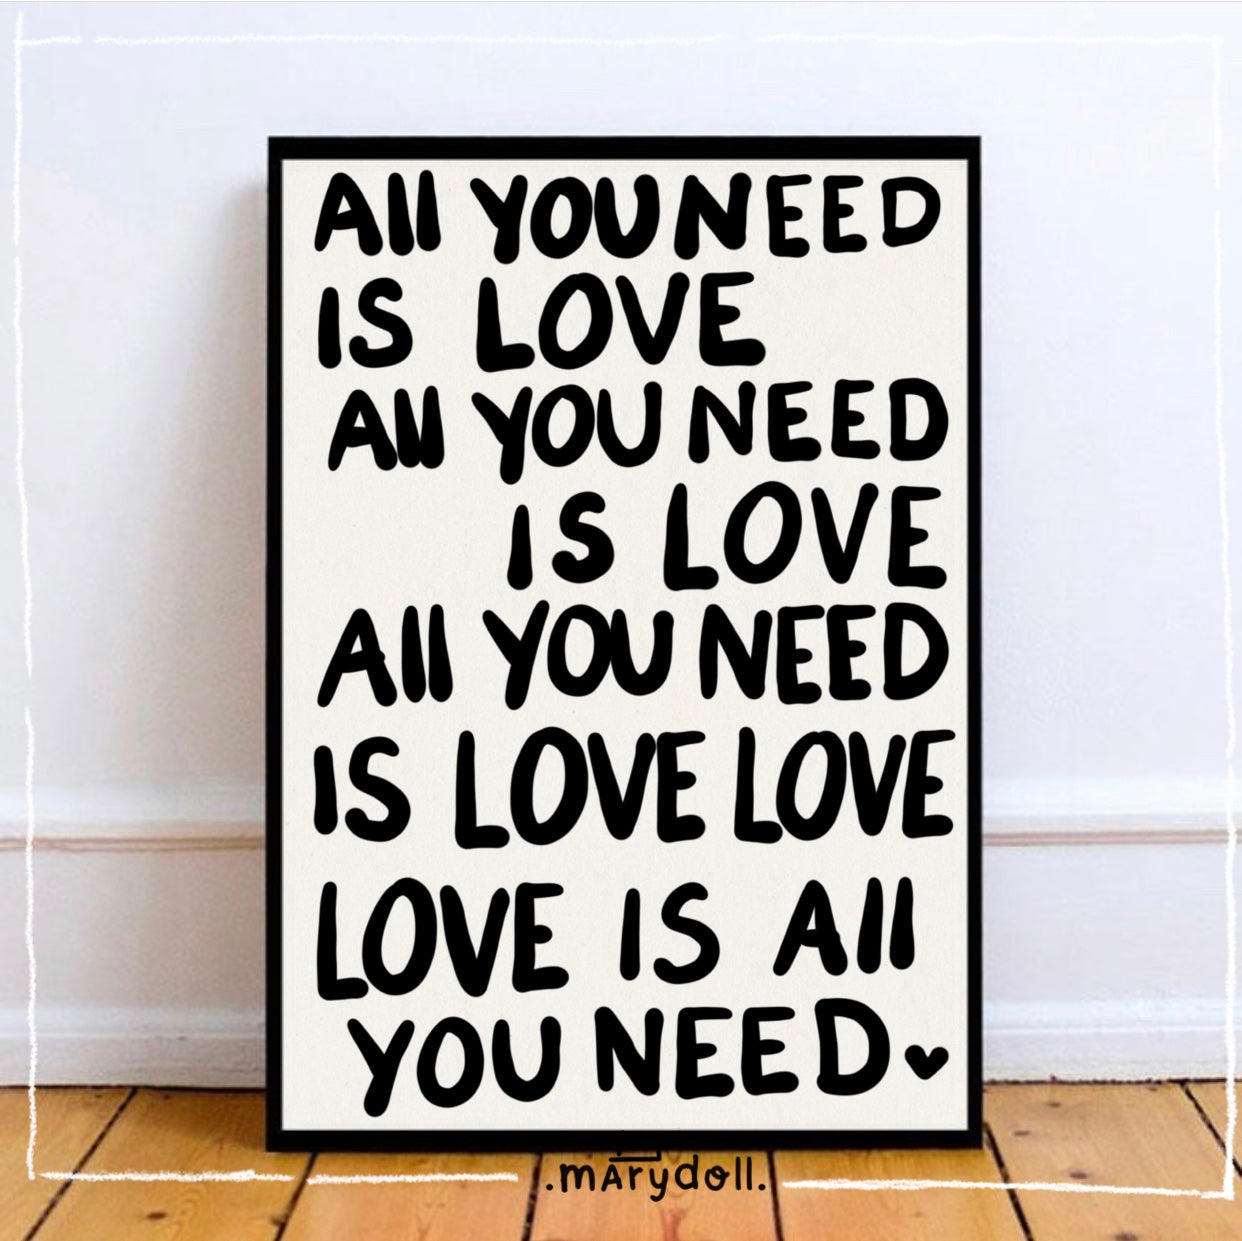 All you need is Love | Print